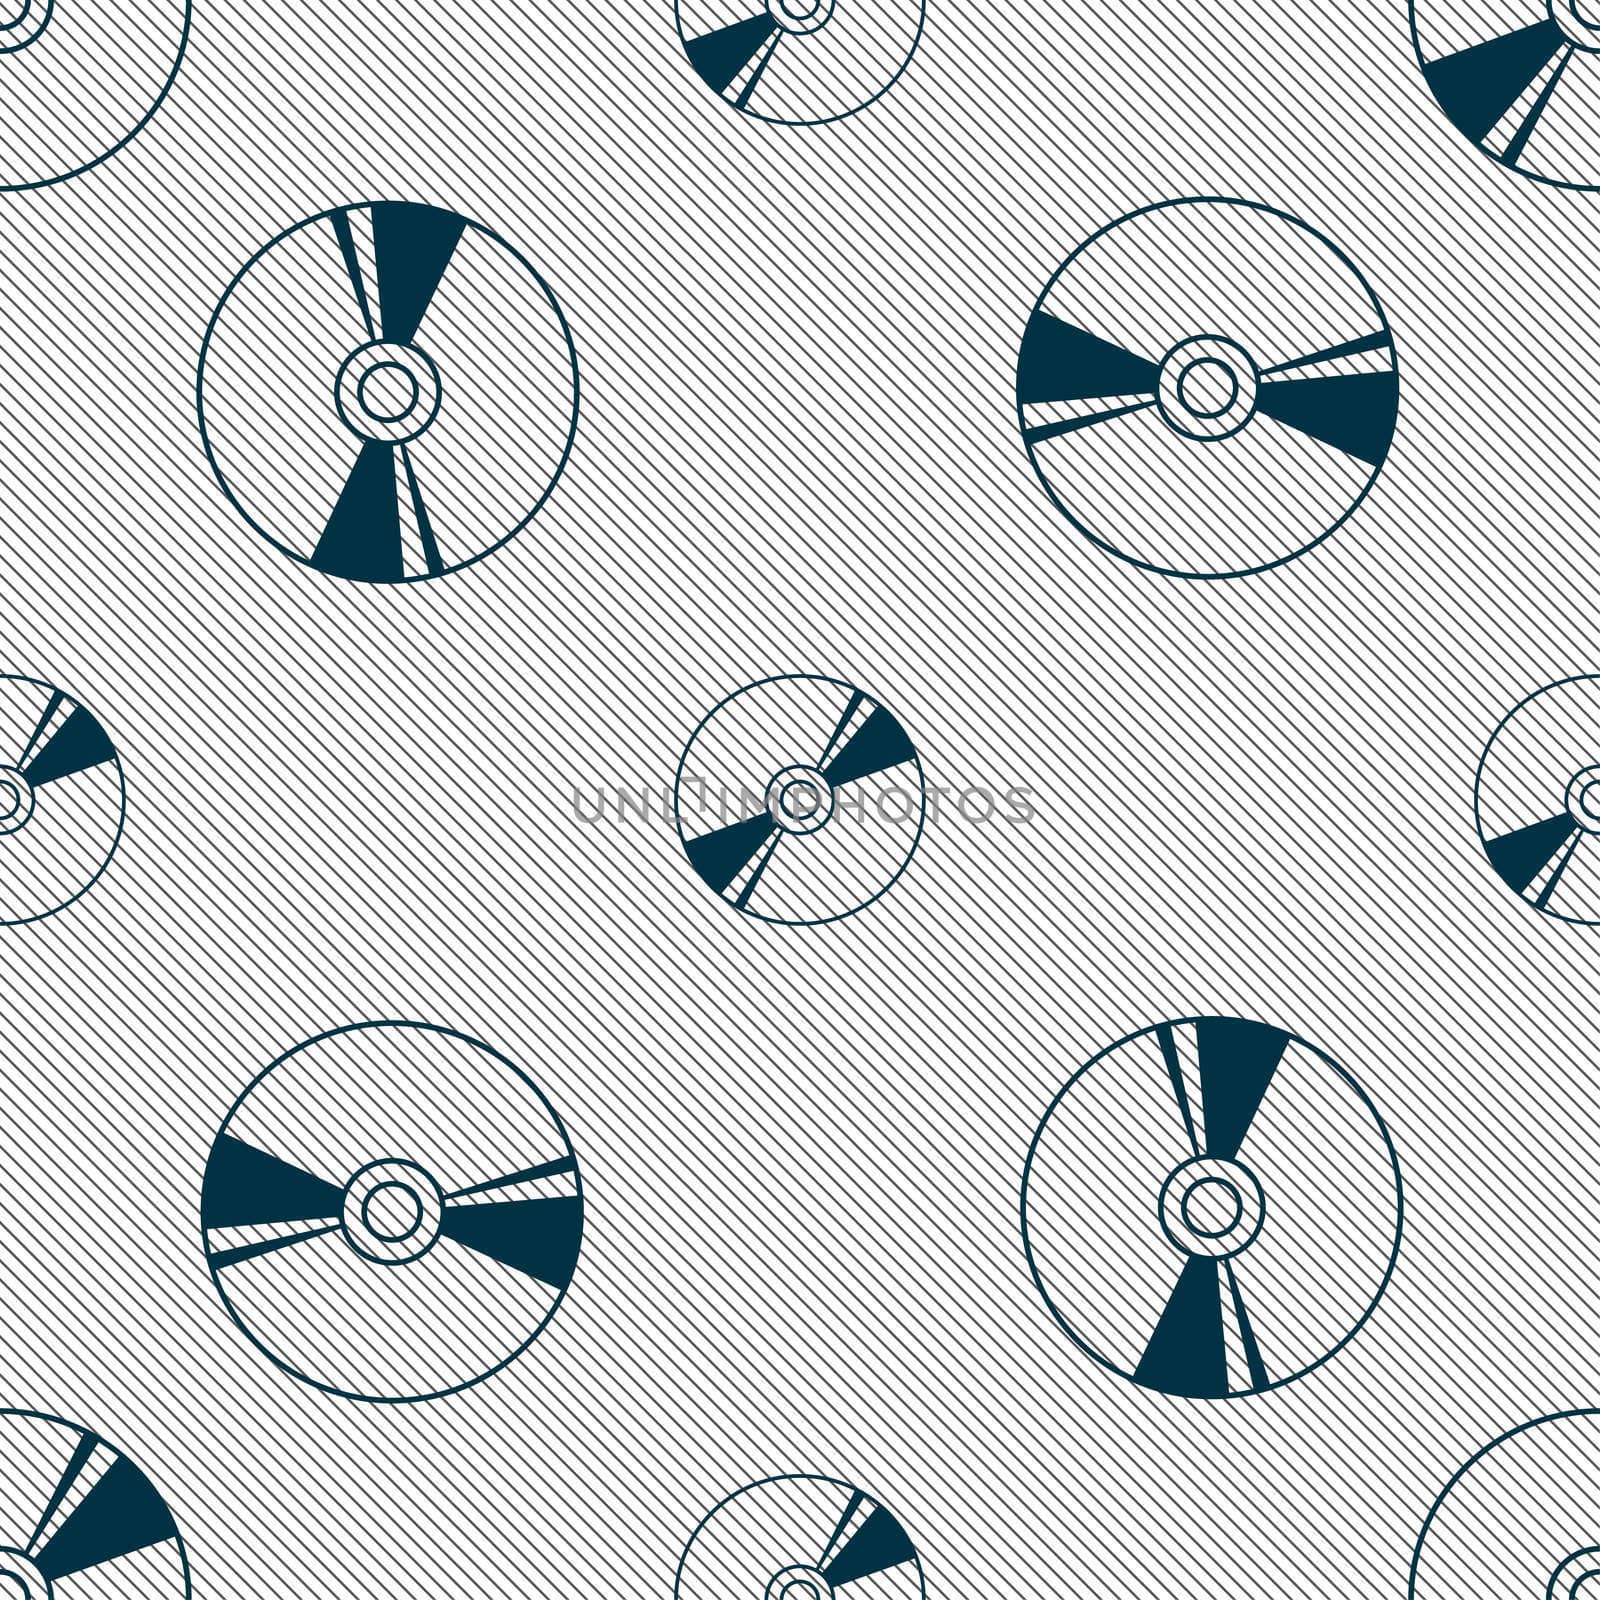 Cd, DVD, compact disk, blue ray icon sign. Seamless pattern with geometric texture. illustration